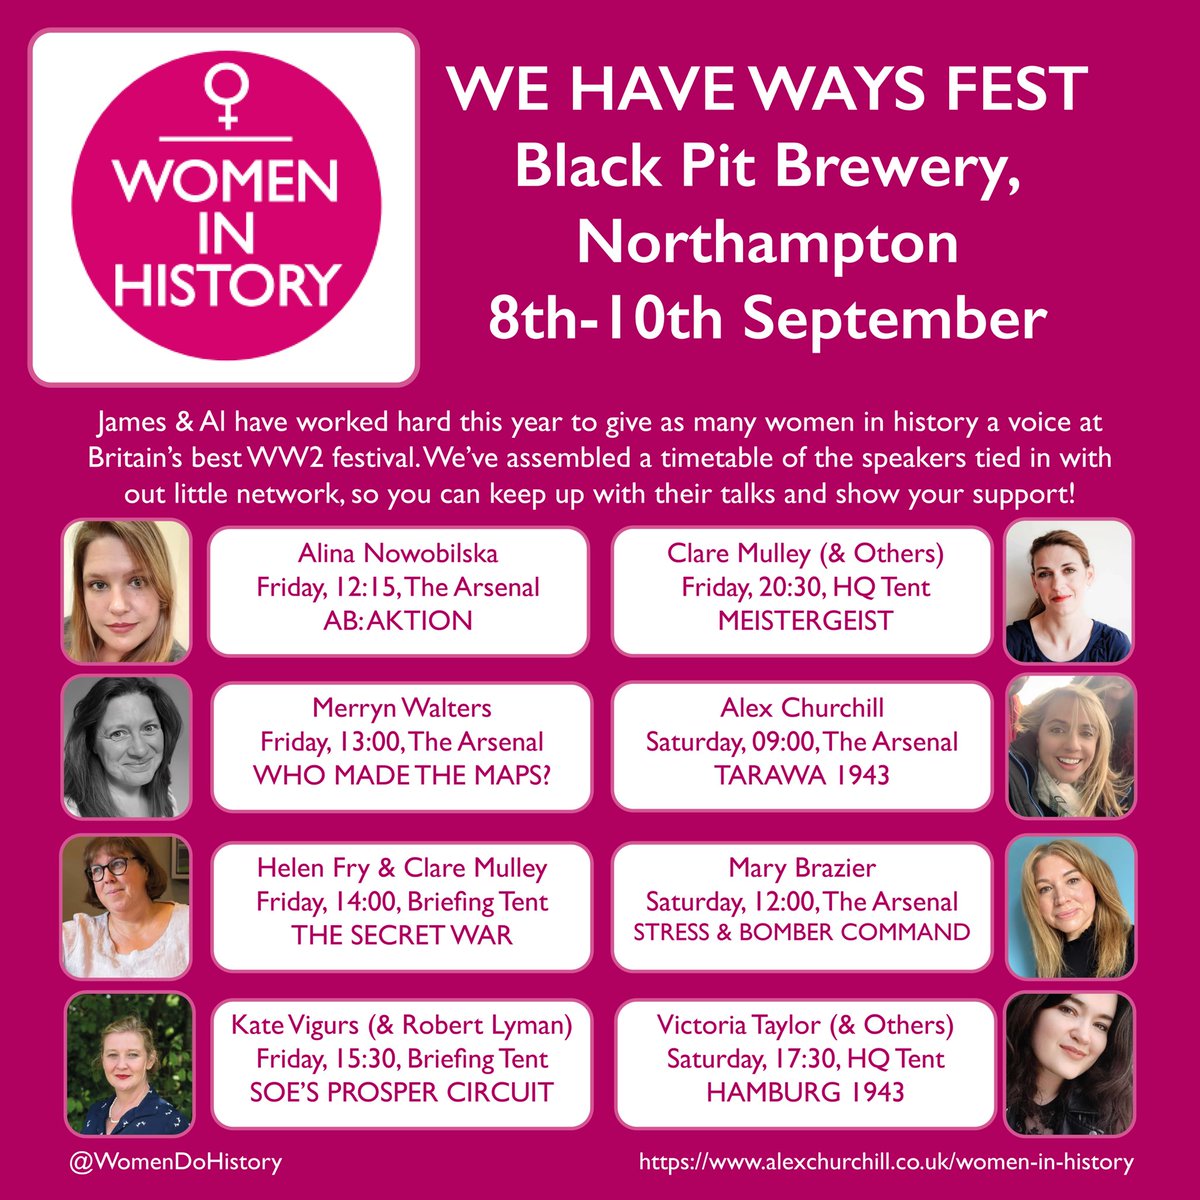 Not long to go until @WeHaveWaysPod Festival!

Girl power! @WW2girl1944 @claremulley @rentaquill @churchill_alex @BrazierMary @historical_kate @SpitfireFilly @WomenDoHistory

See you there!!